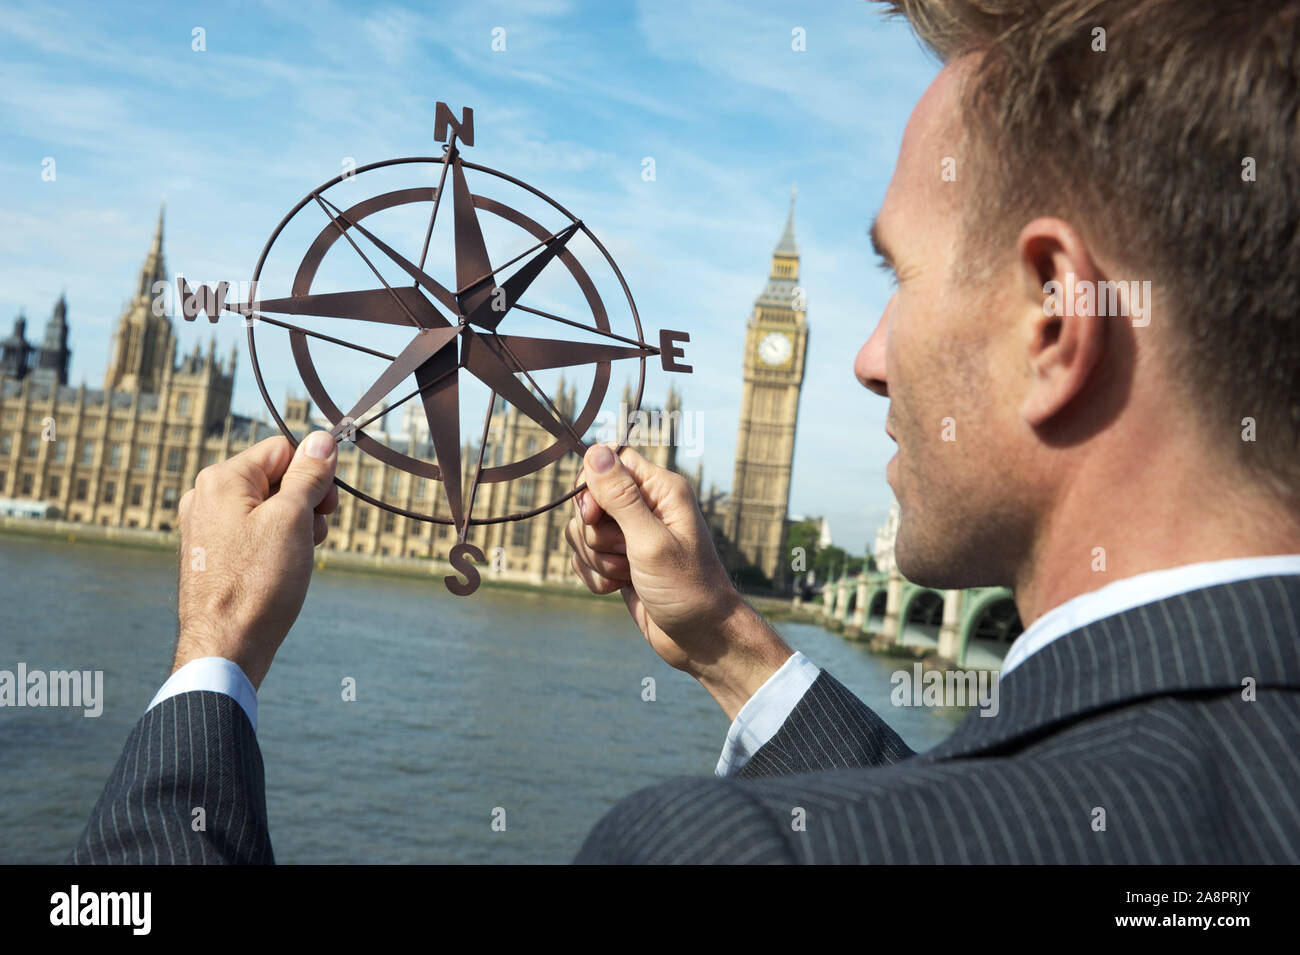 Businessman holding old-fashioned compass rose in front of the Houses of Parliament, London, UK Stock Photo